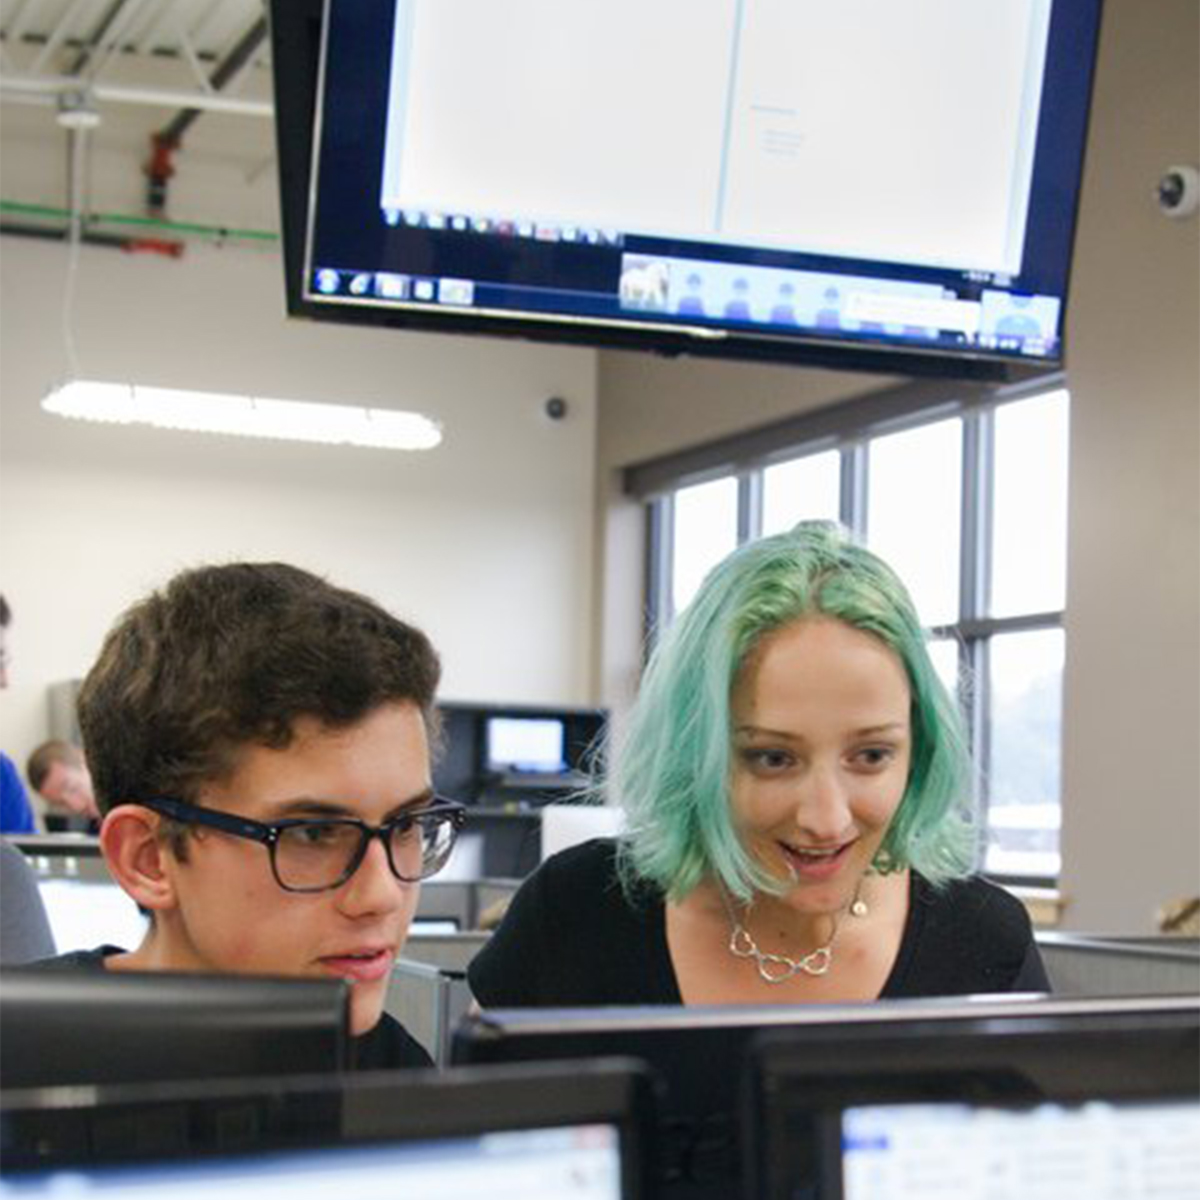 Students working on a computer together